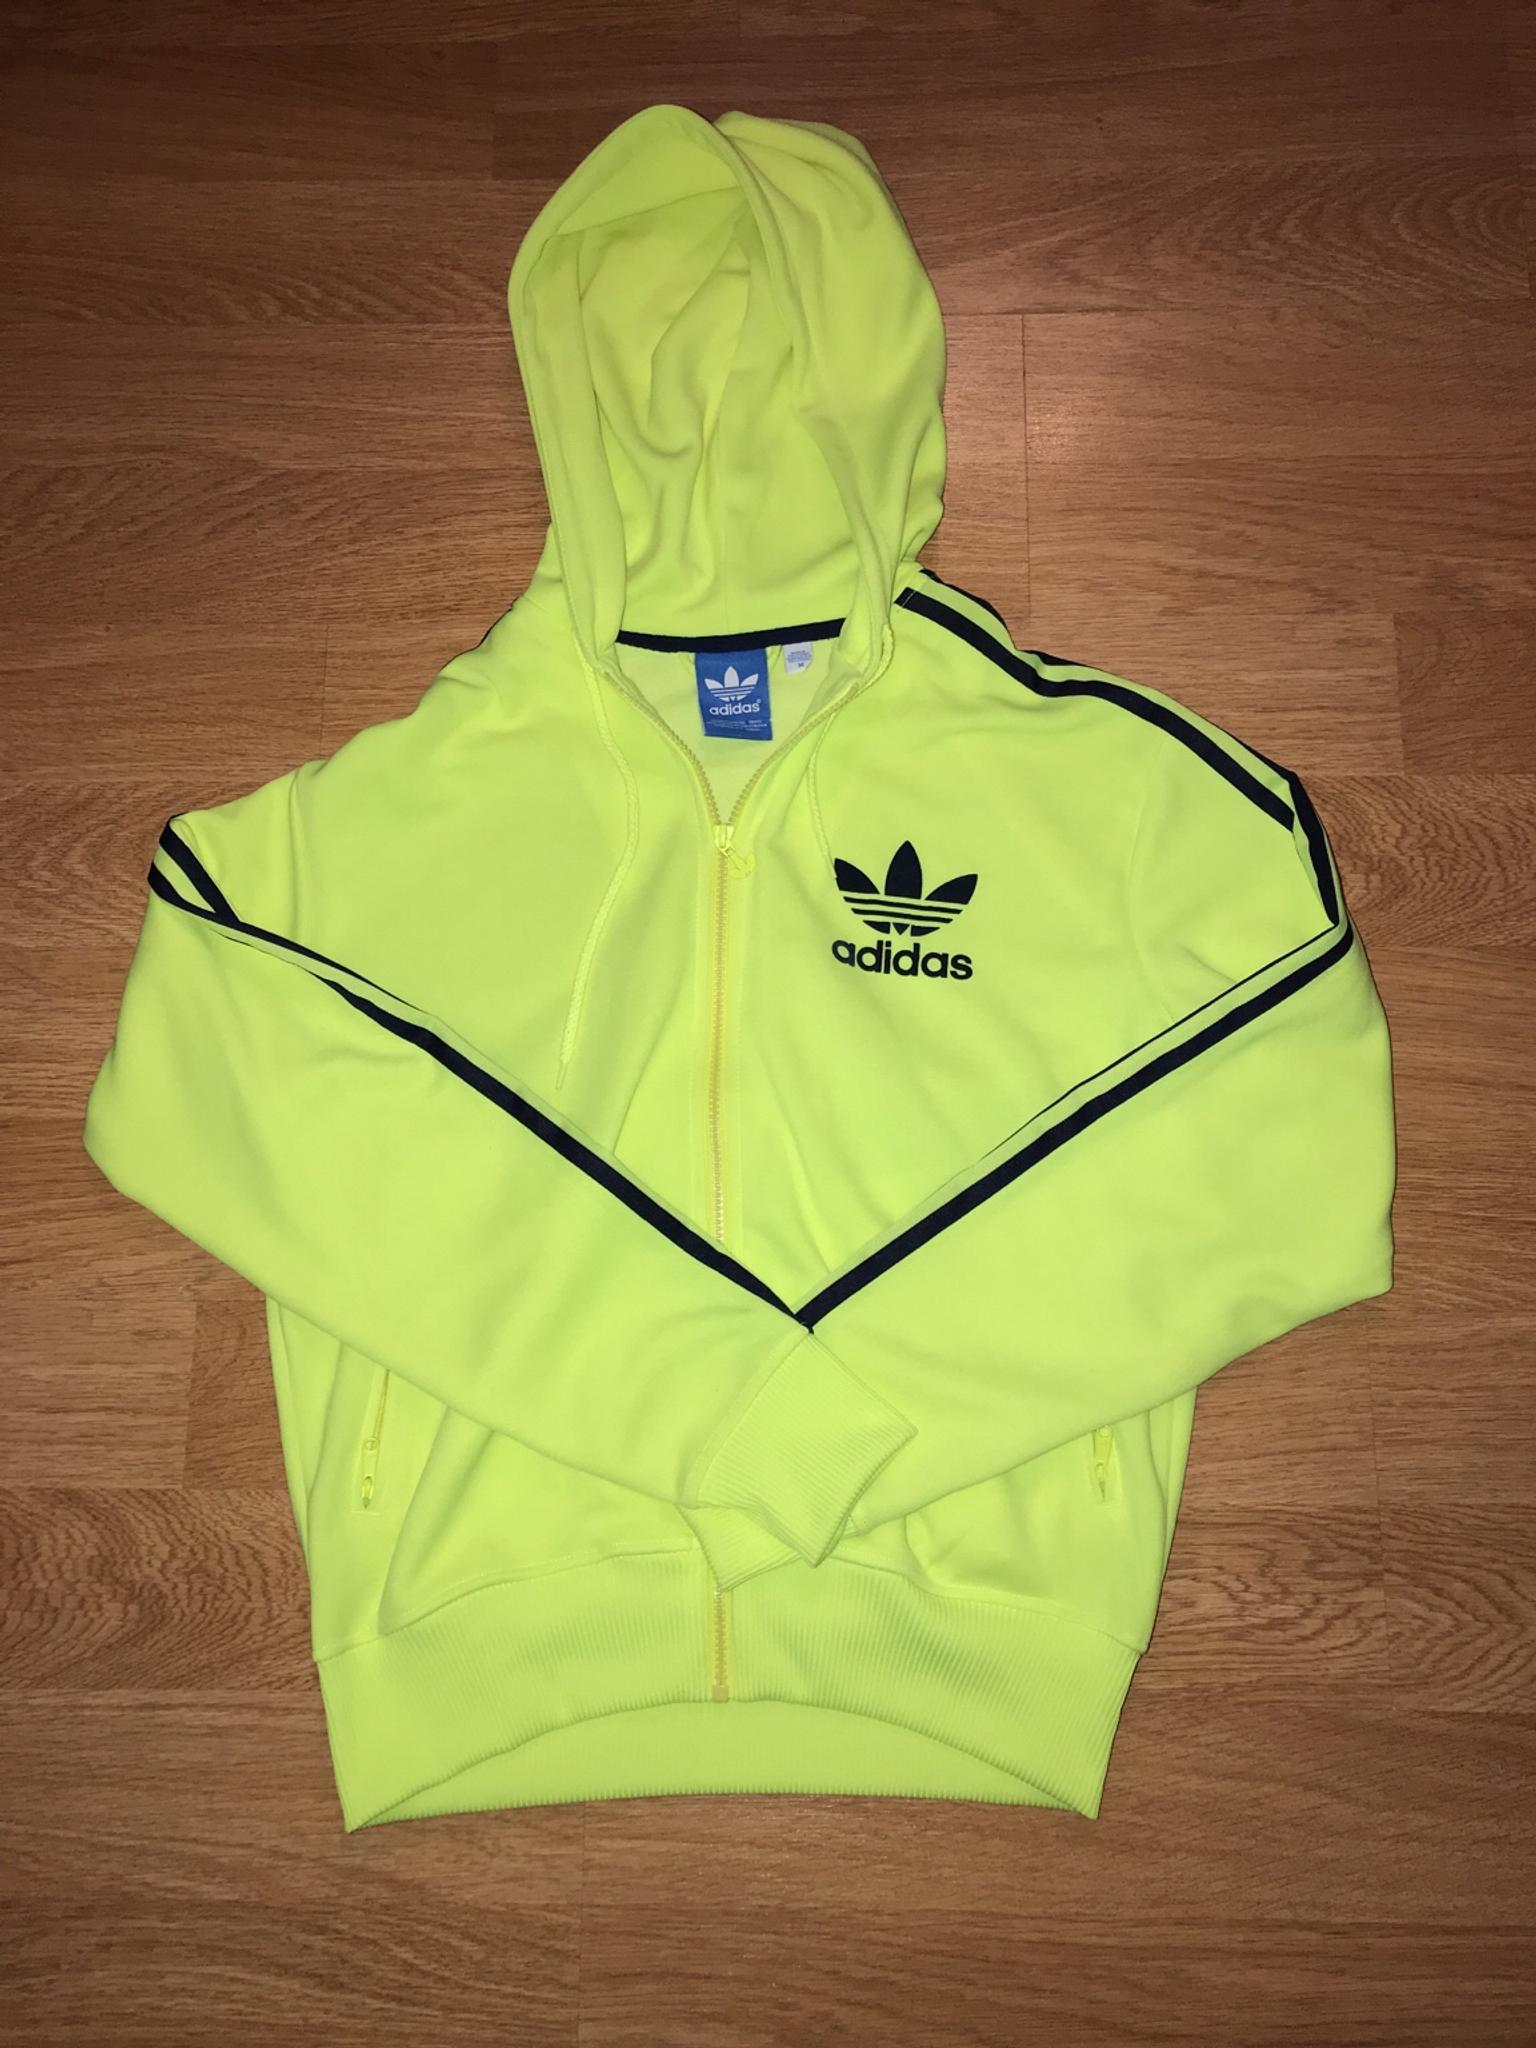 Adidas Neon Jacket in WS9 Walsall for 